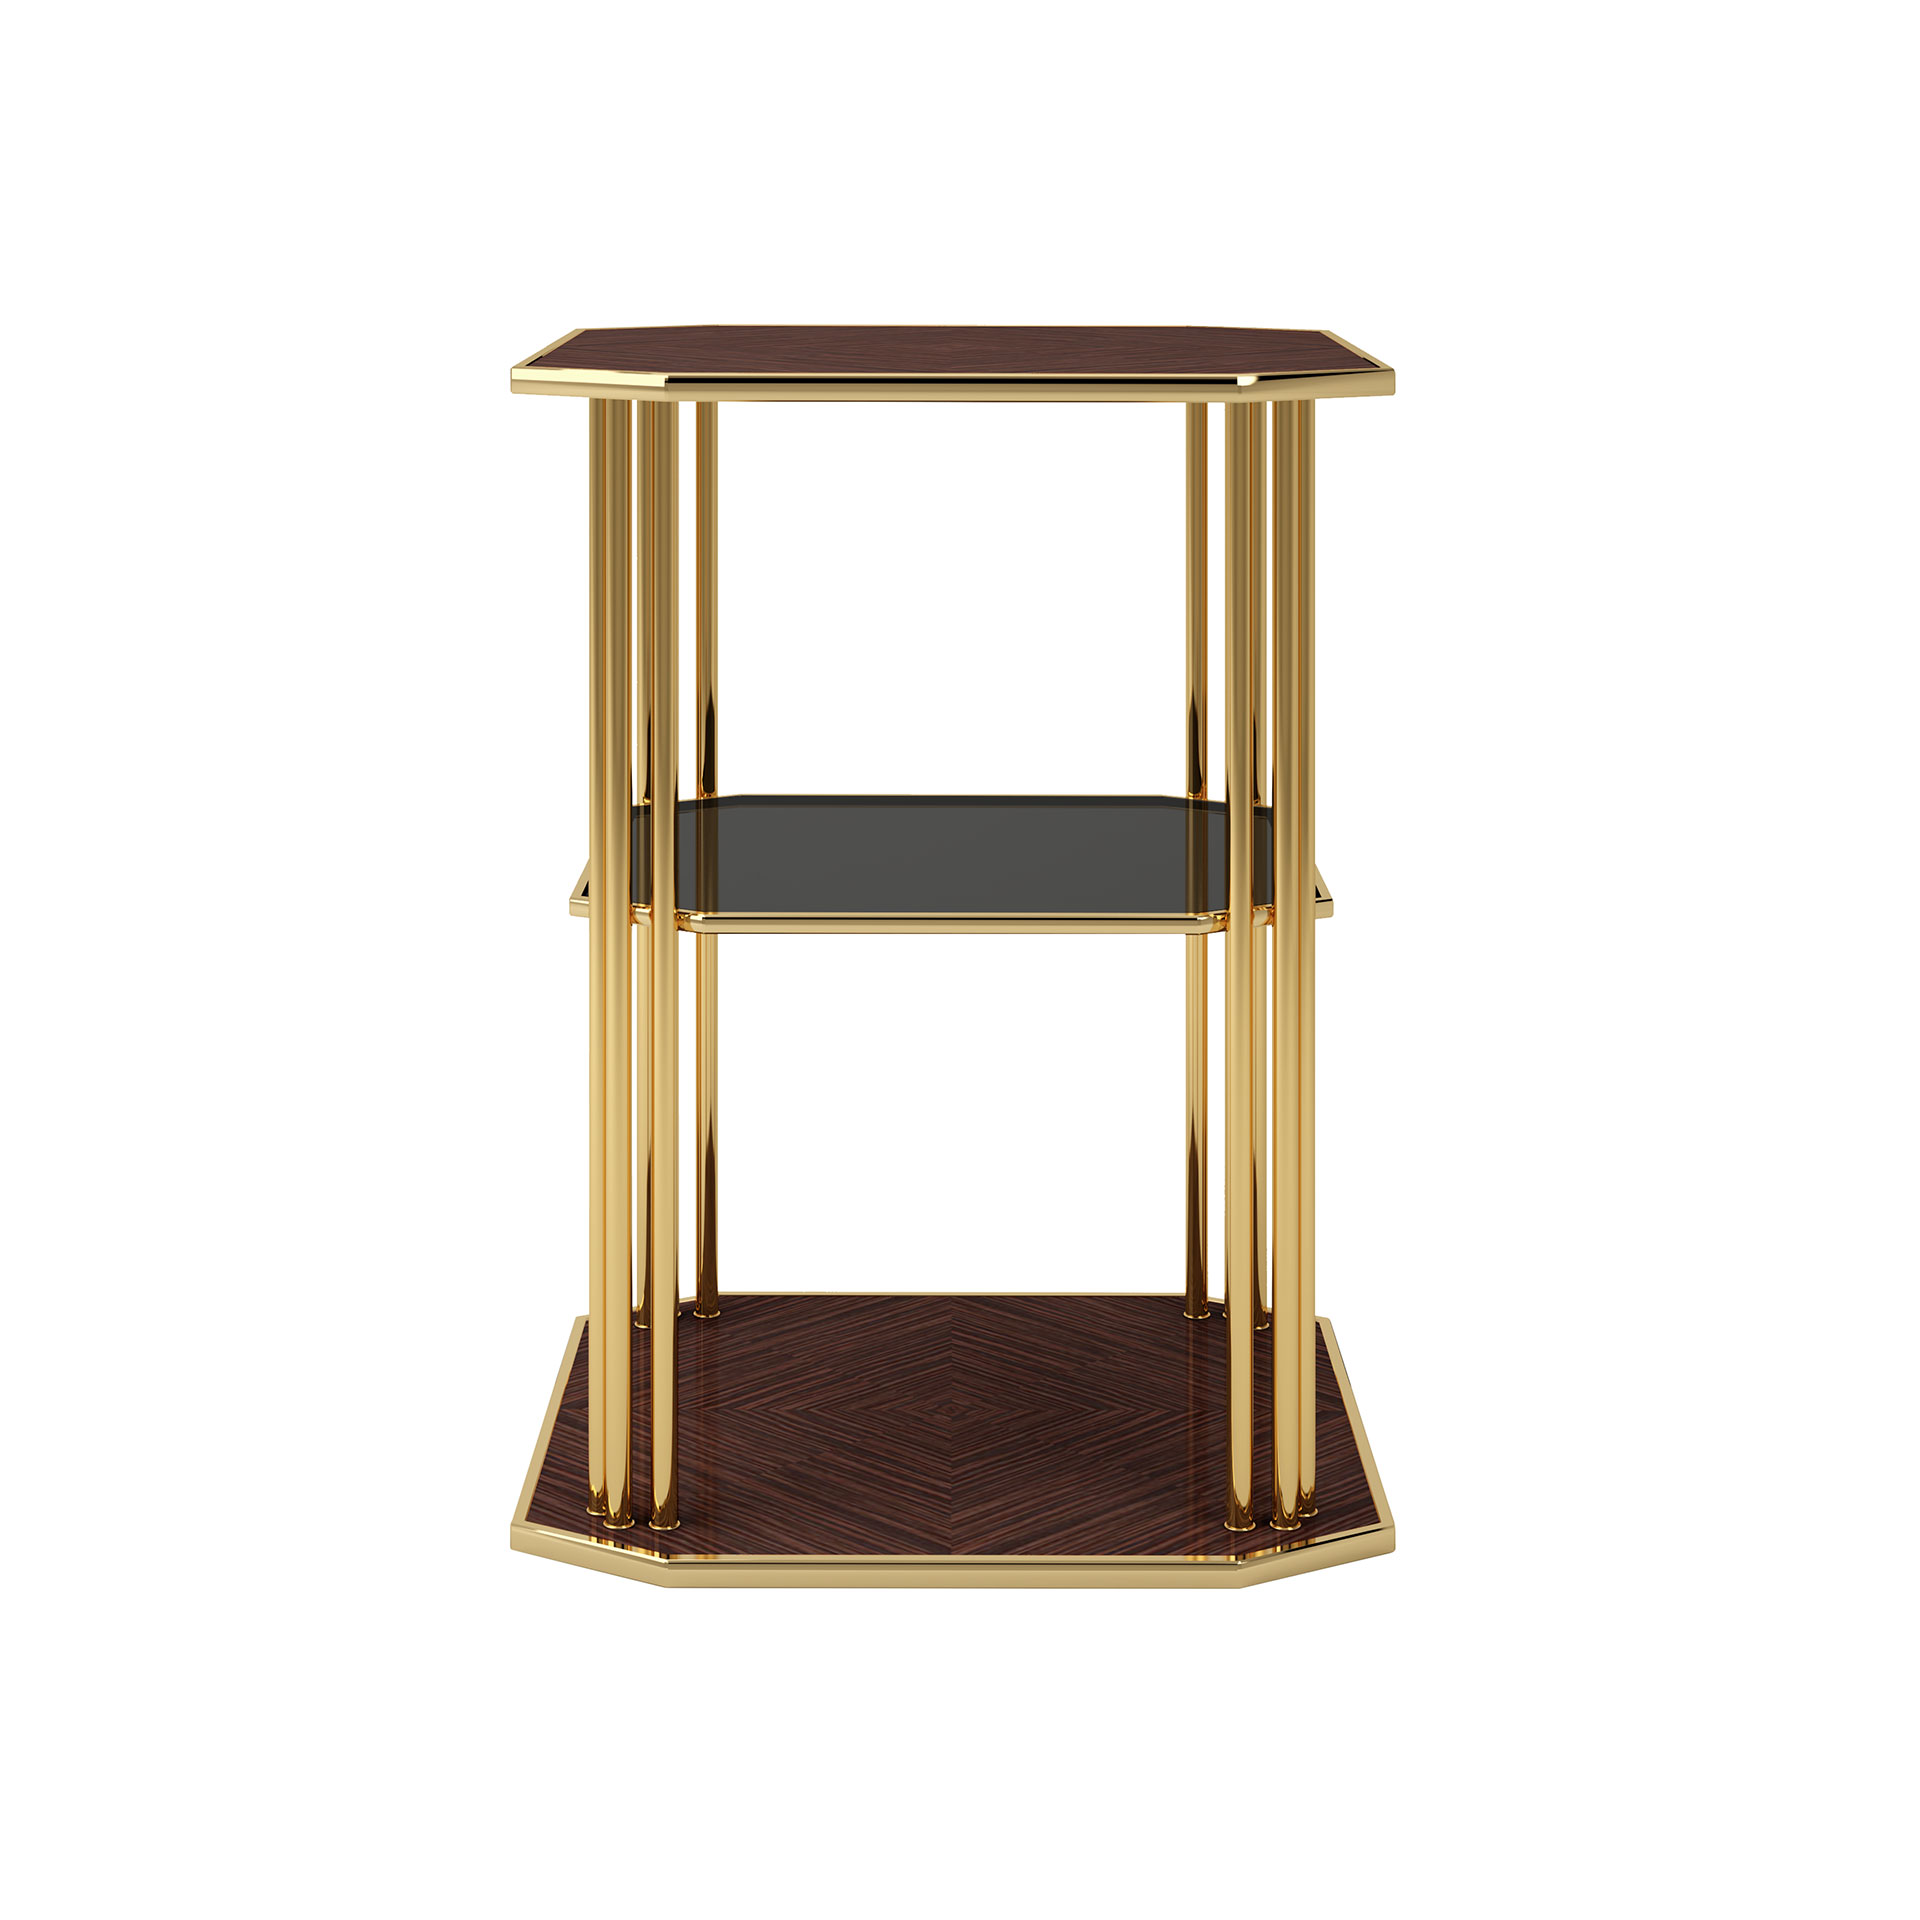 Paramount side table